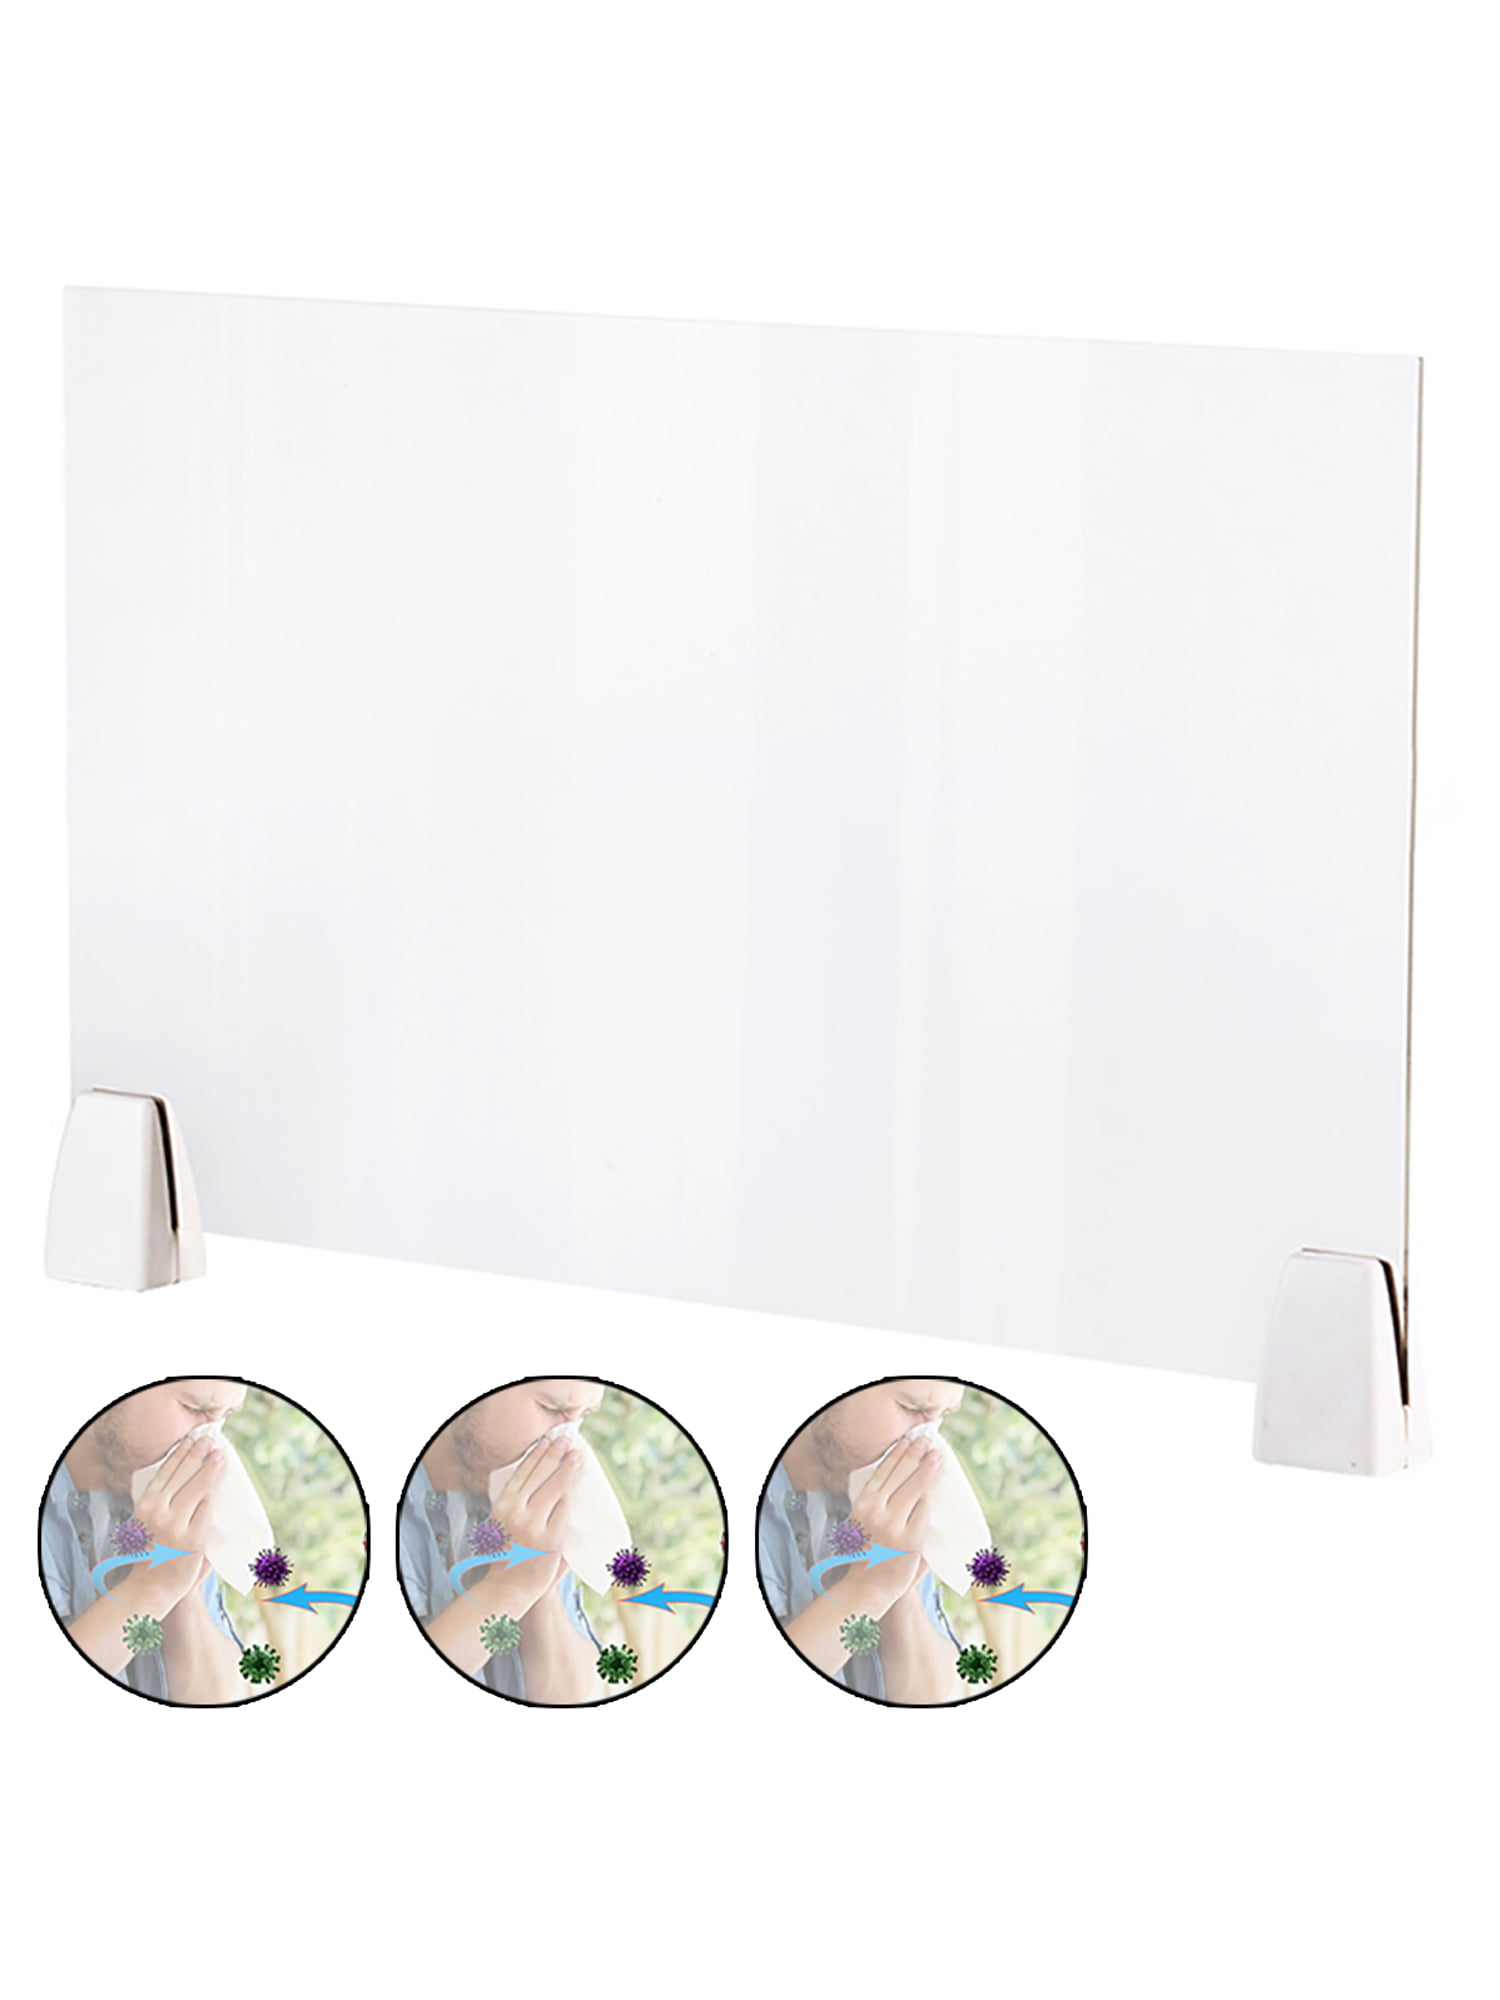 3mm Acrylic/PET Plastic Screen Sneeze Guard for Checkout Counters 